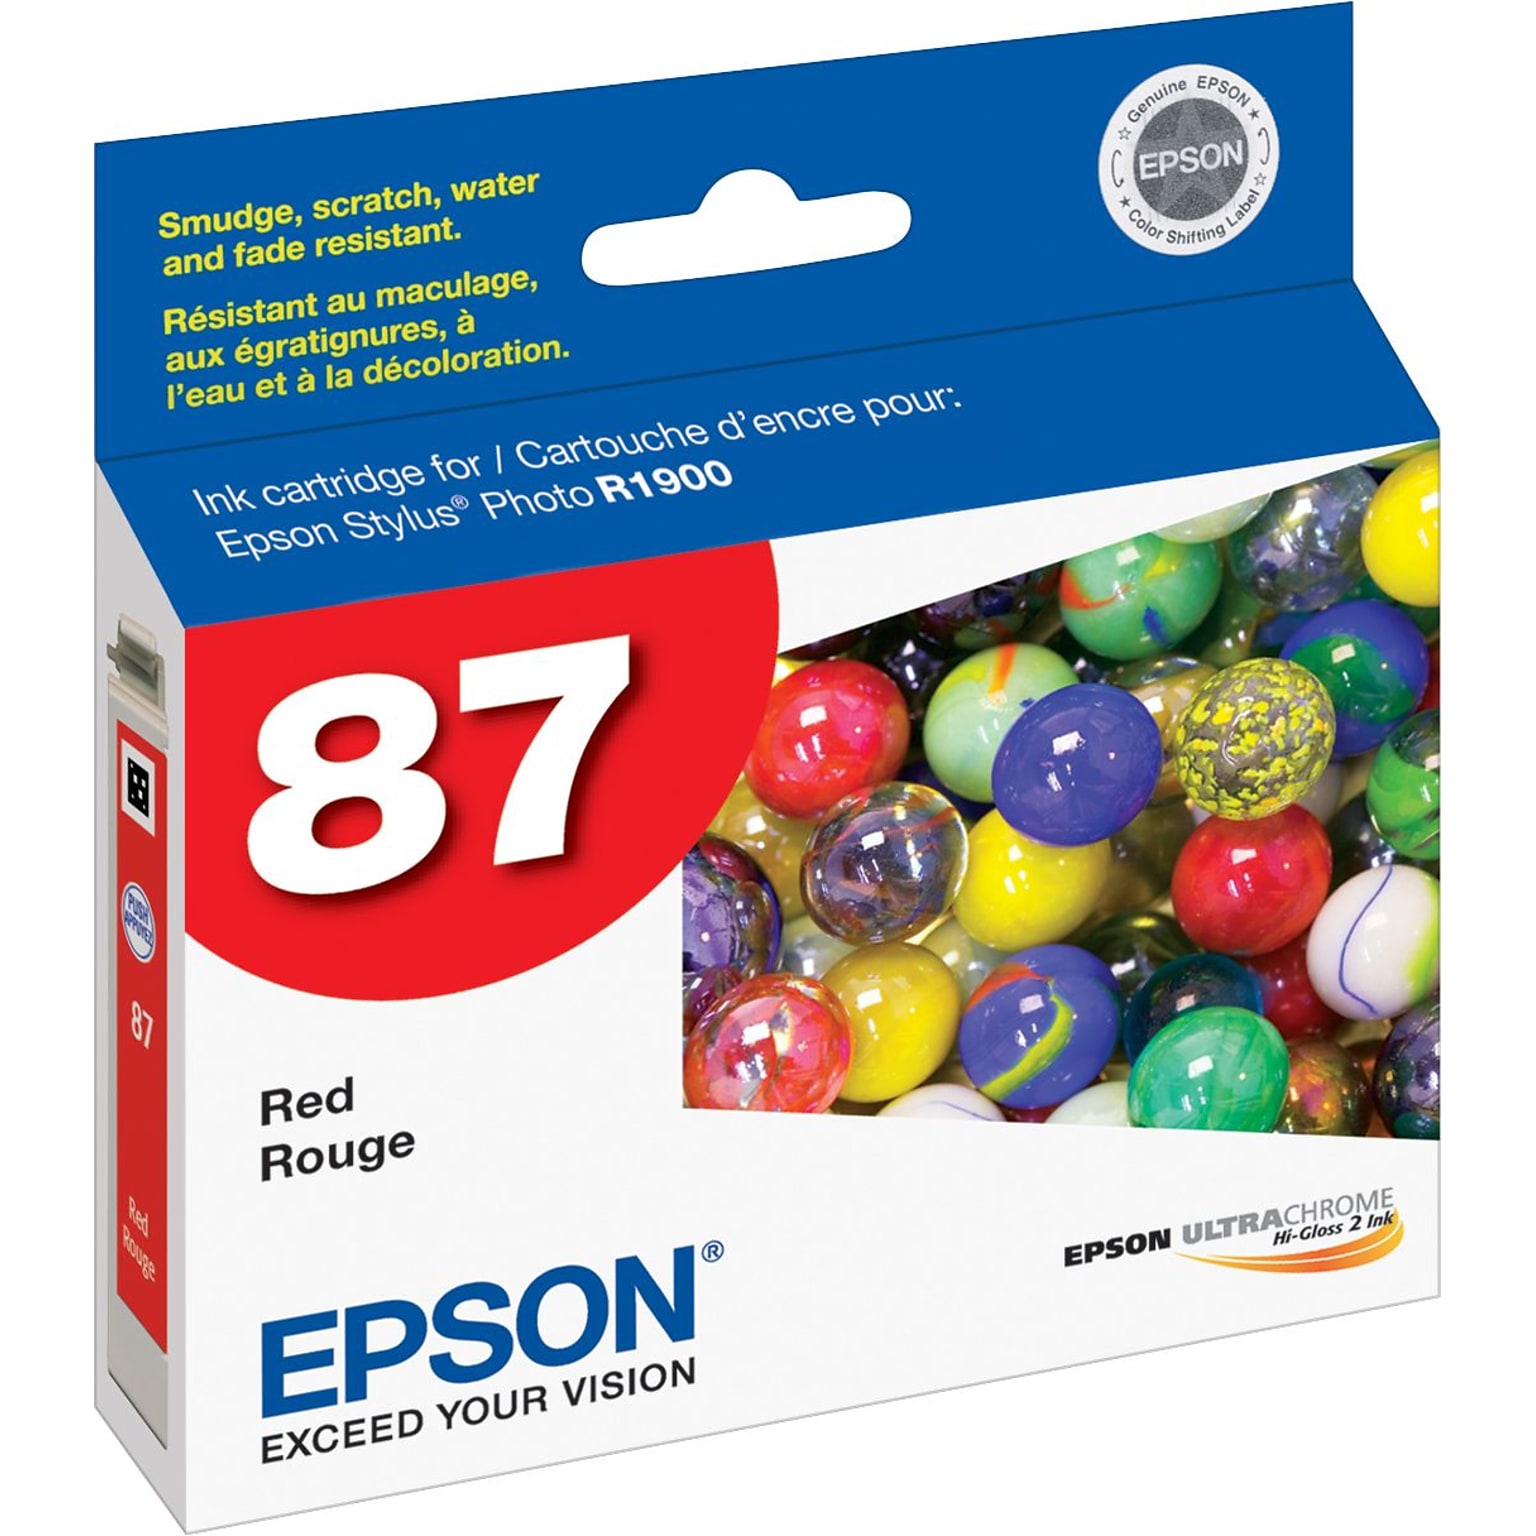 Epson T87 Ultrachrome Red Standard Yield Ink Cartridge